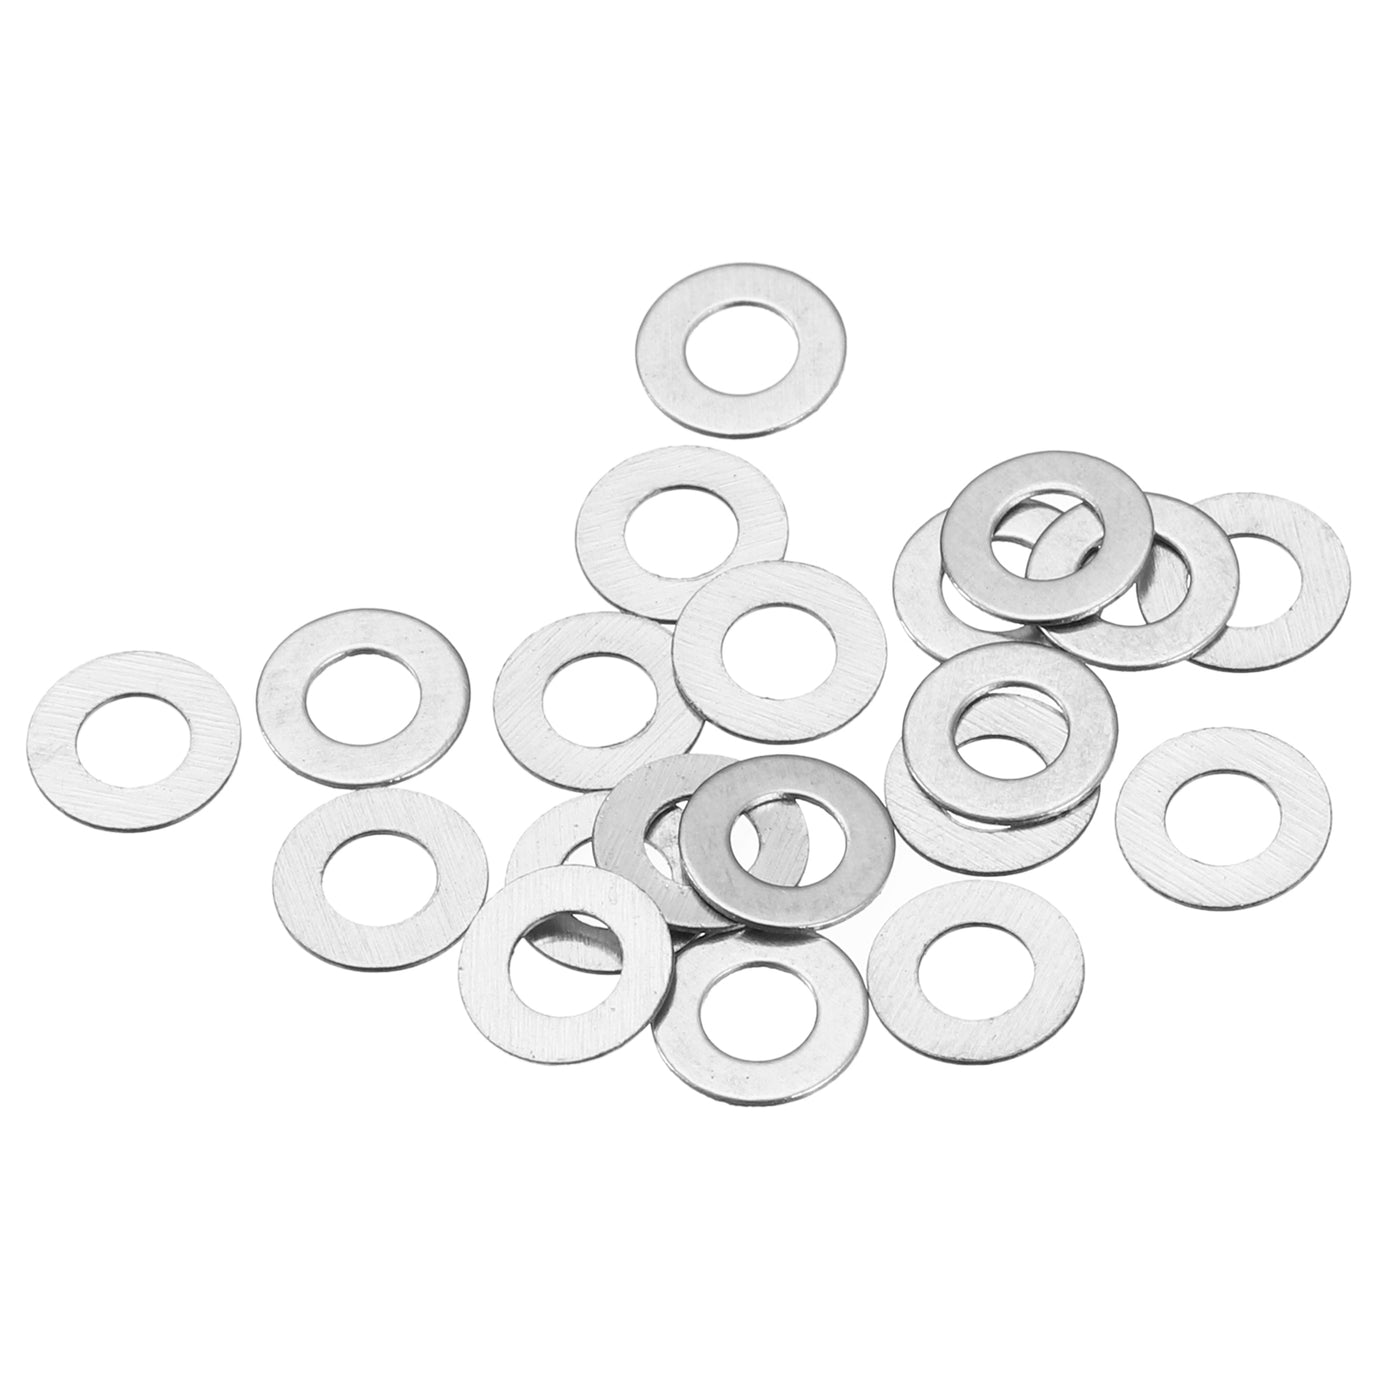 uxcell Uxcell M3 304 Stainless Steel Flat Washers, 50pcs 3x6x0.2mm Ultra Thin Flat Spacers